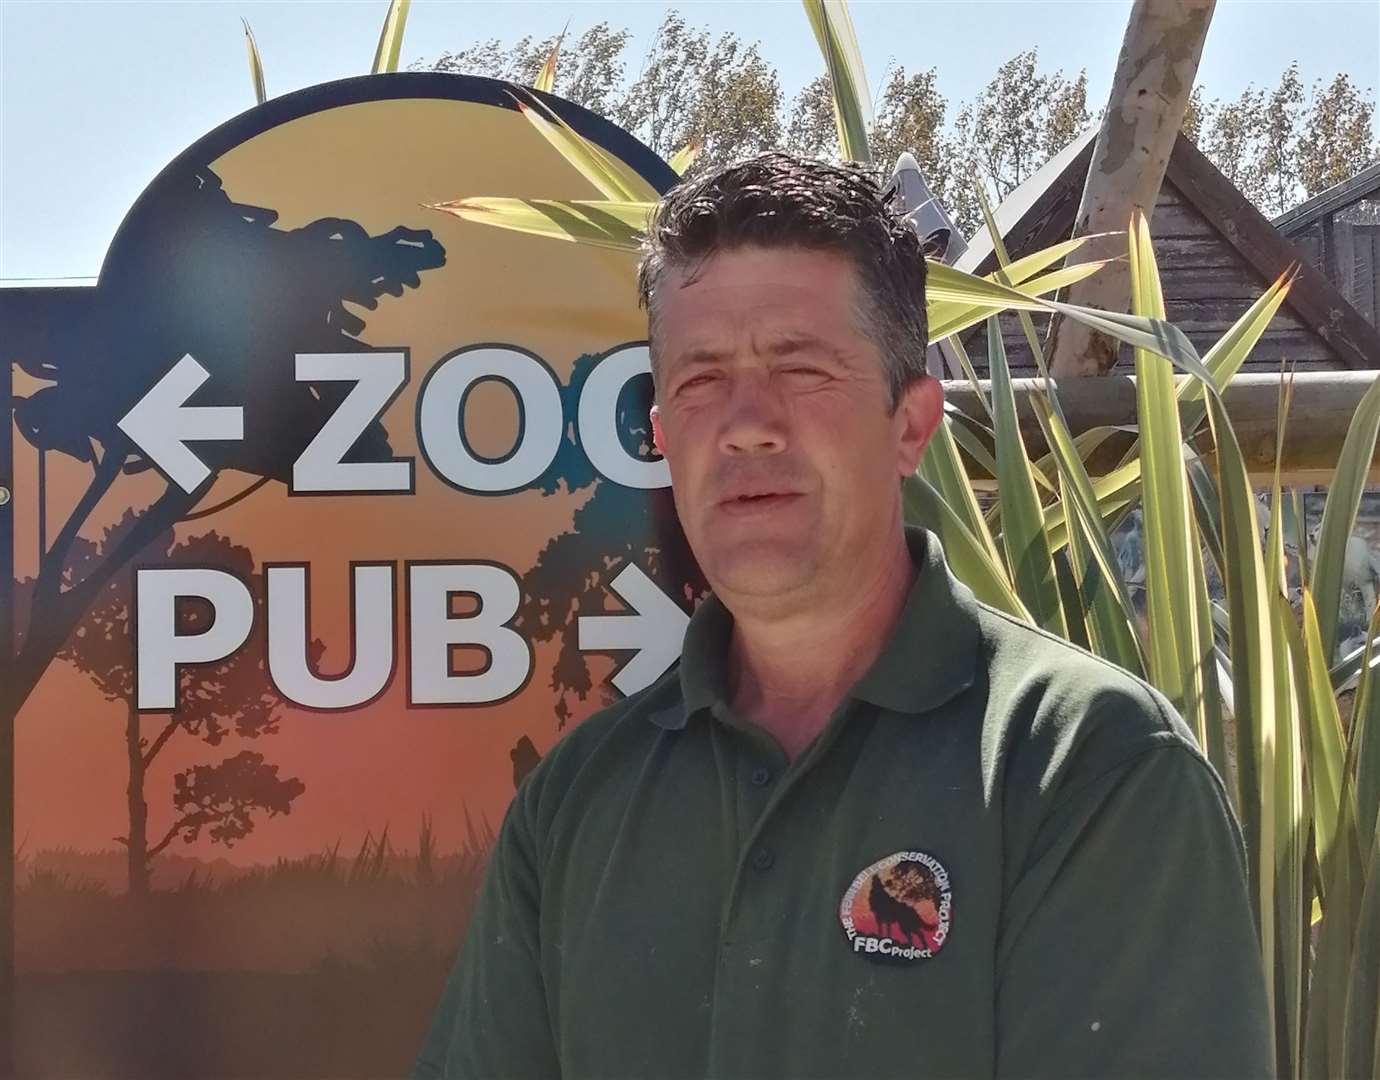 Andy Cowell, owner of The Fenn Bell Zoo and pub